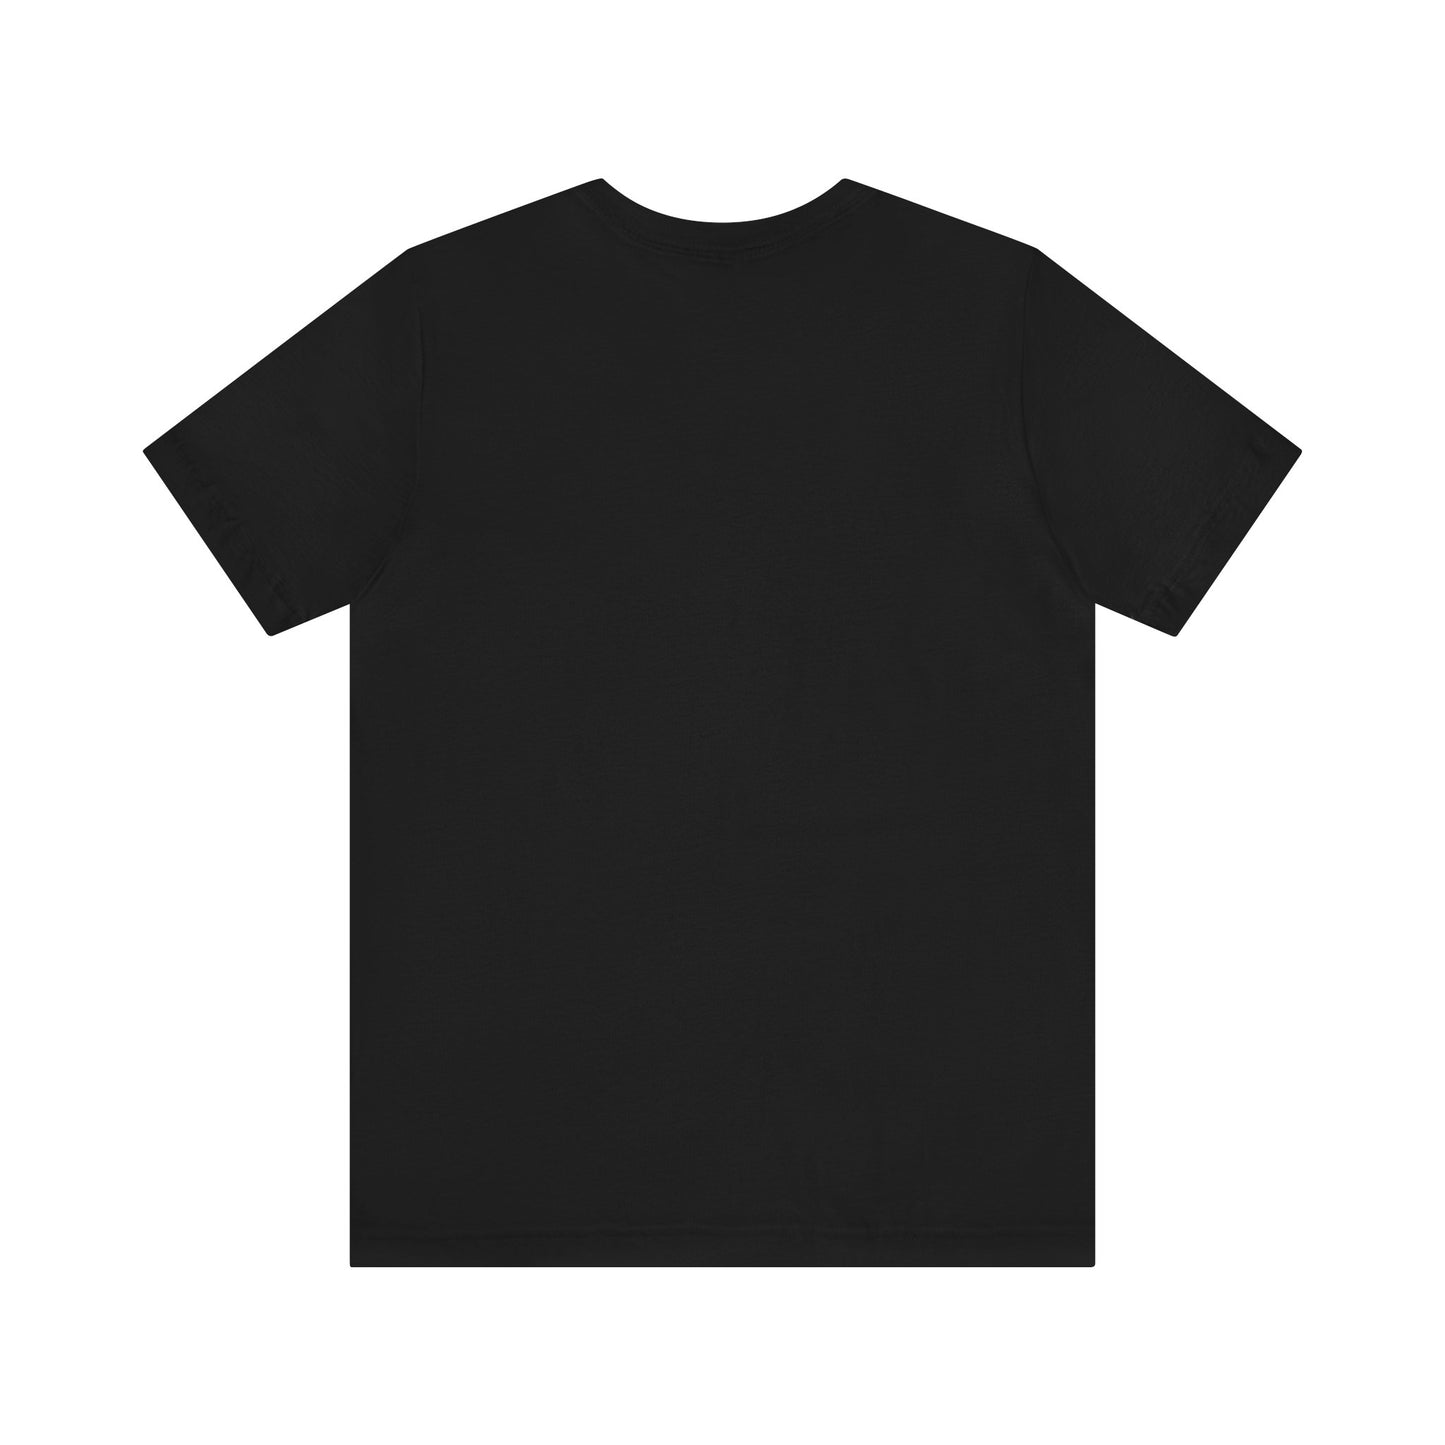 "ELEVATE APPAREL" Graphic T-Shirt